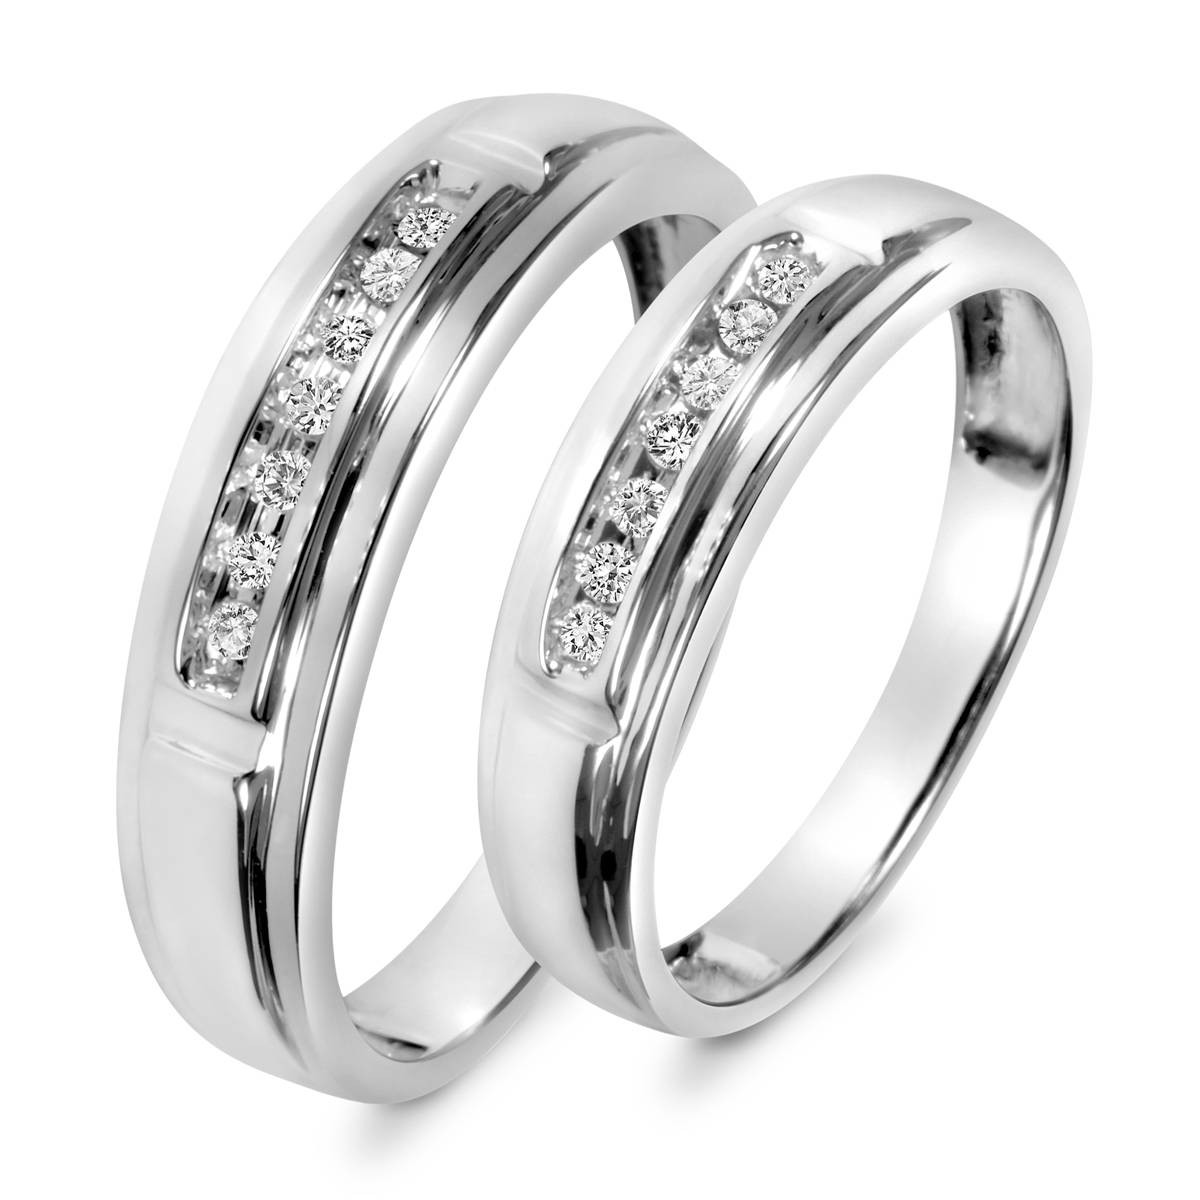 His And Hers Wedding Rings Cheap
 15 Inspirations of Cheap Wedding Bands Sets His And Hers